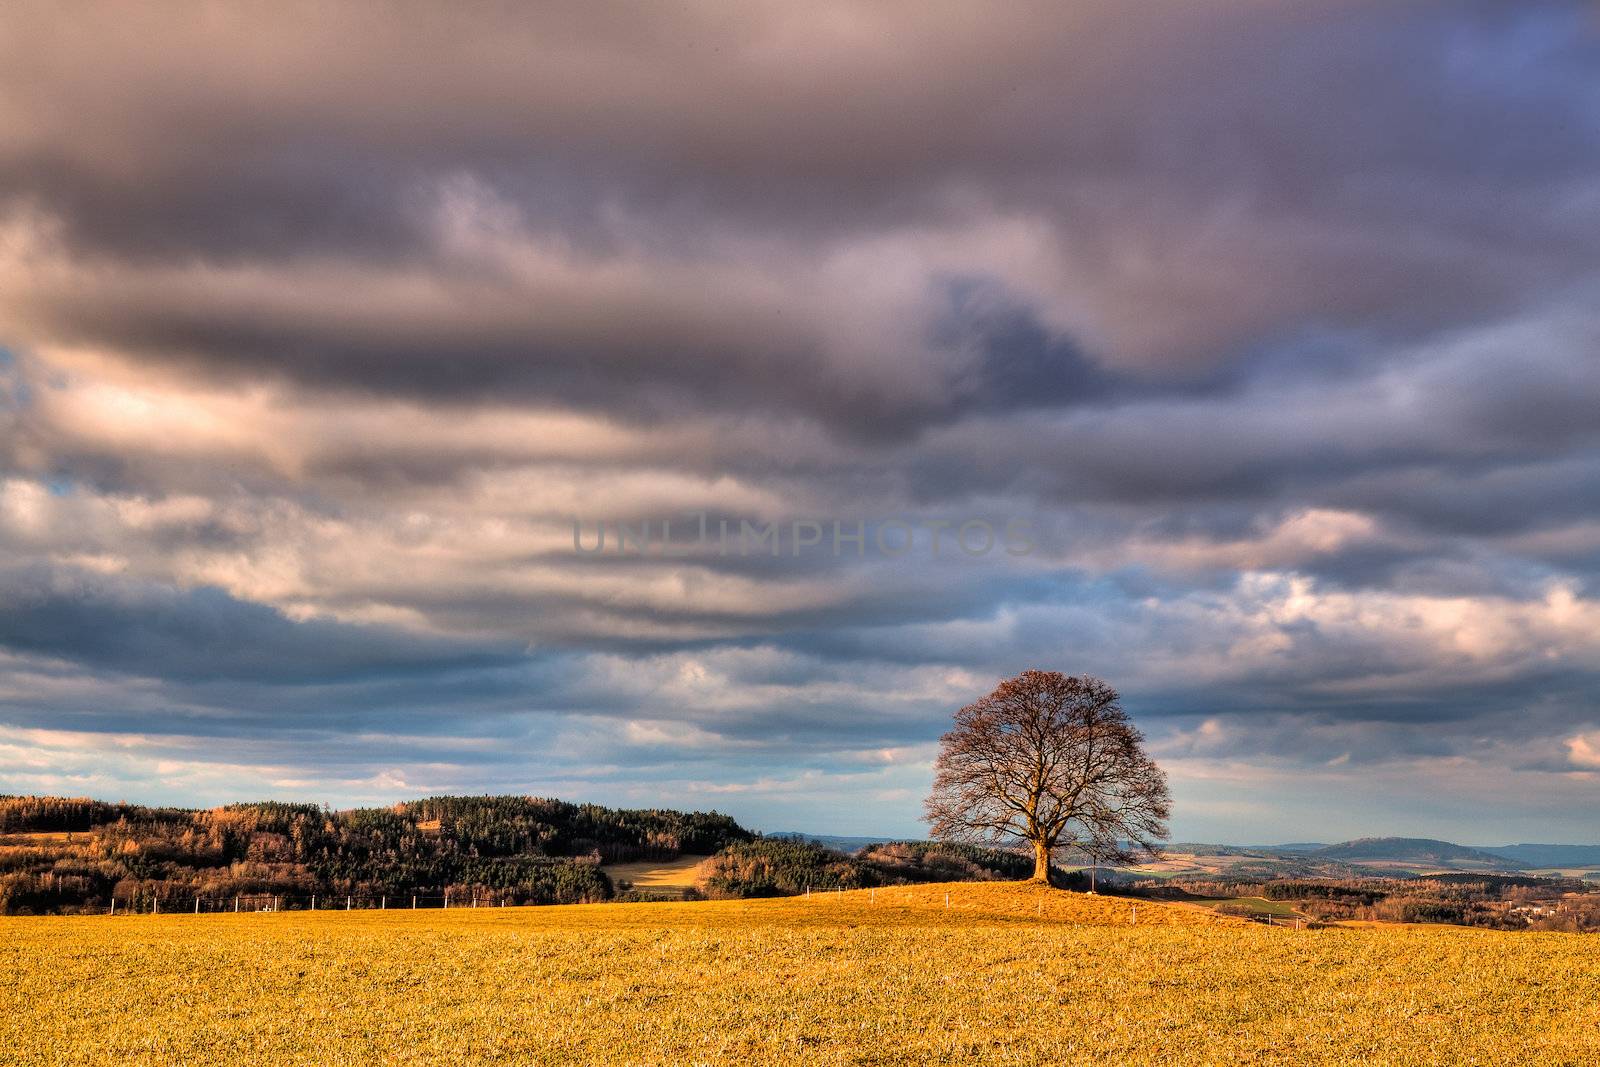 Memorable tree on the autumn meadow in the daytime